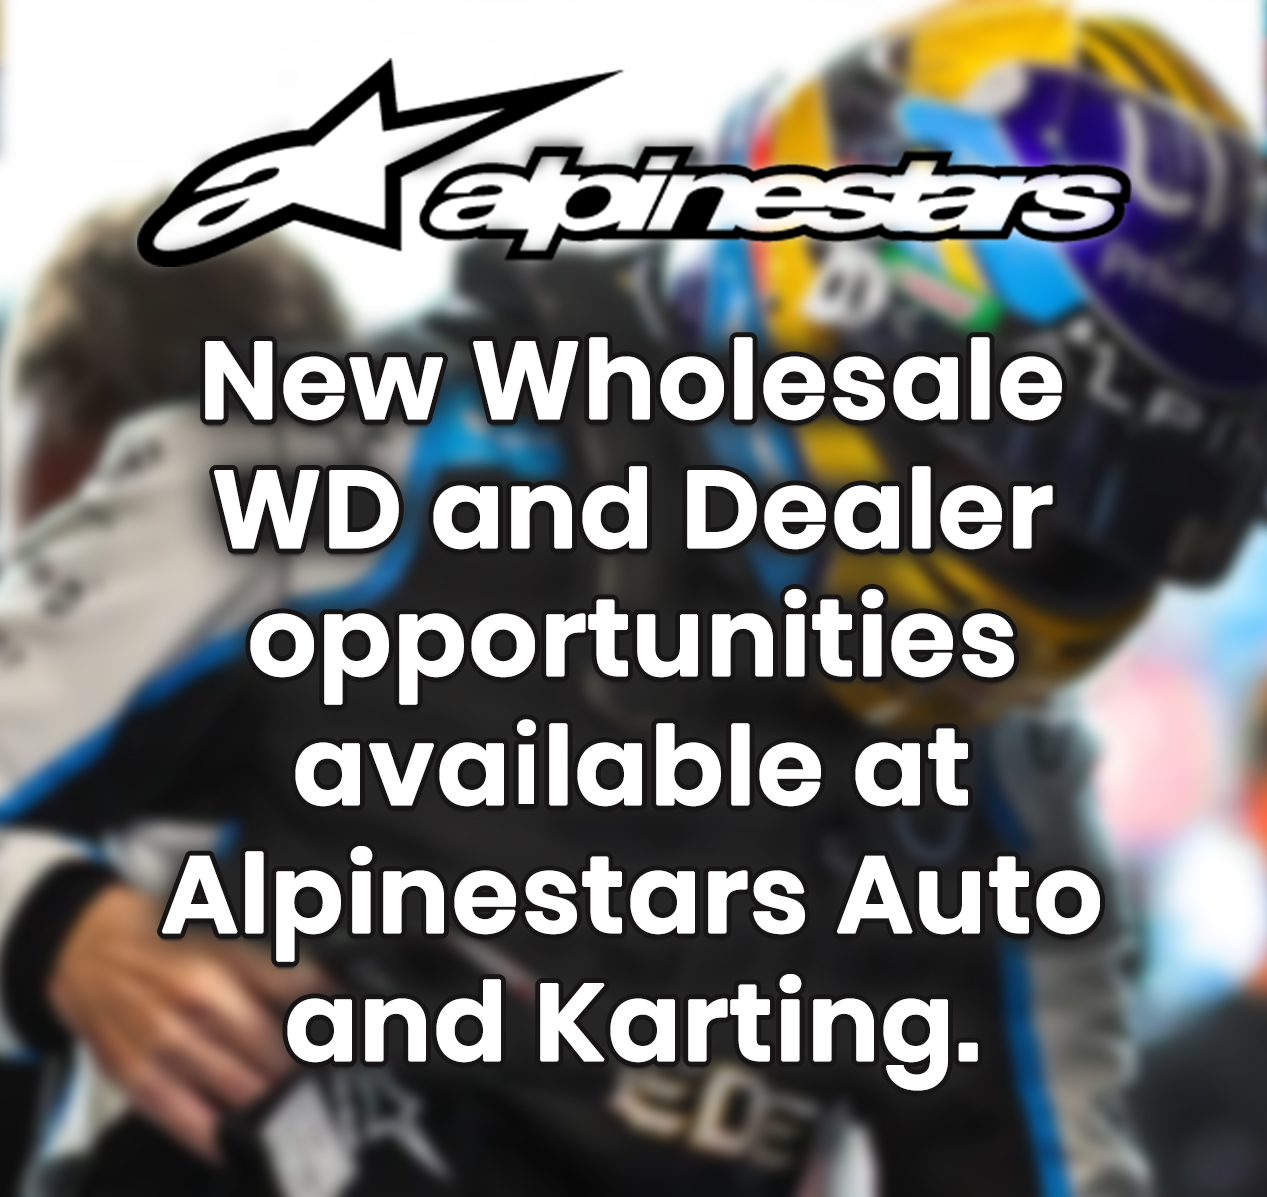 New Wholesale WD and Dealer opportunities available